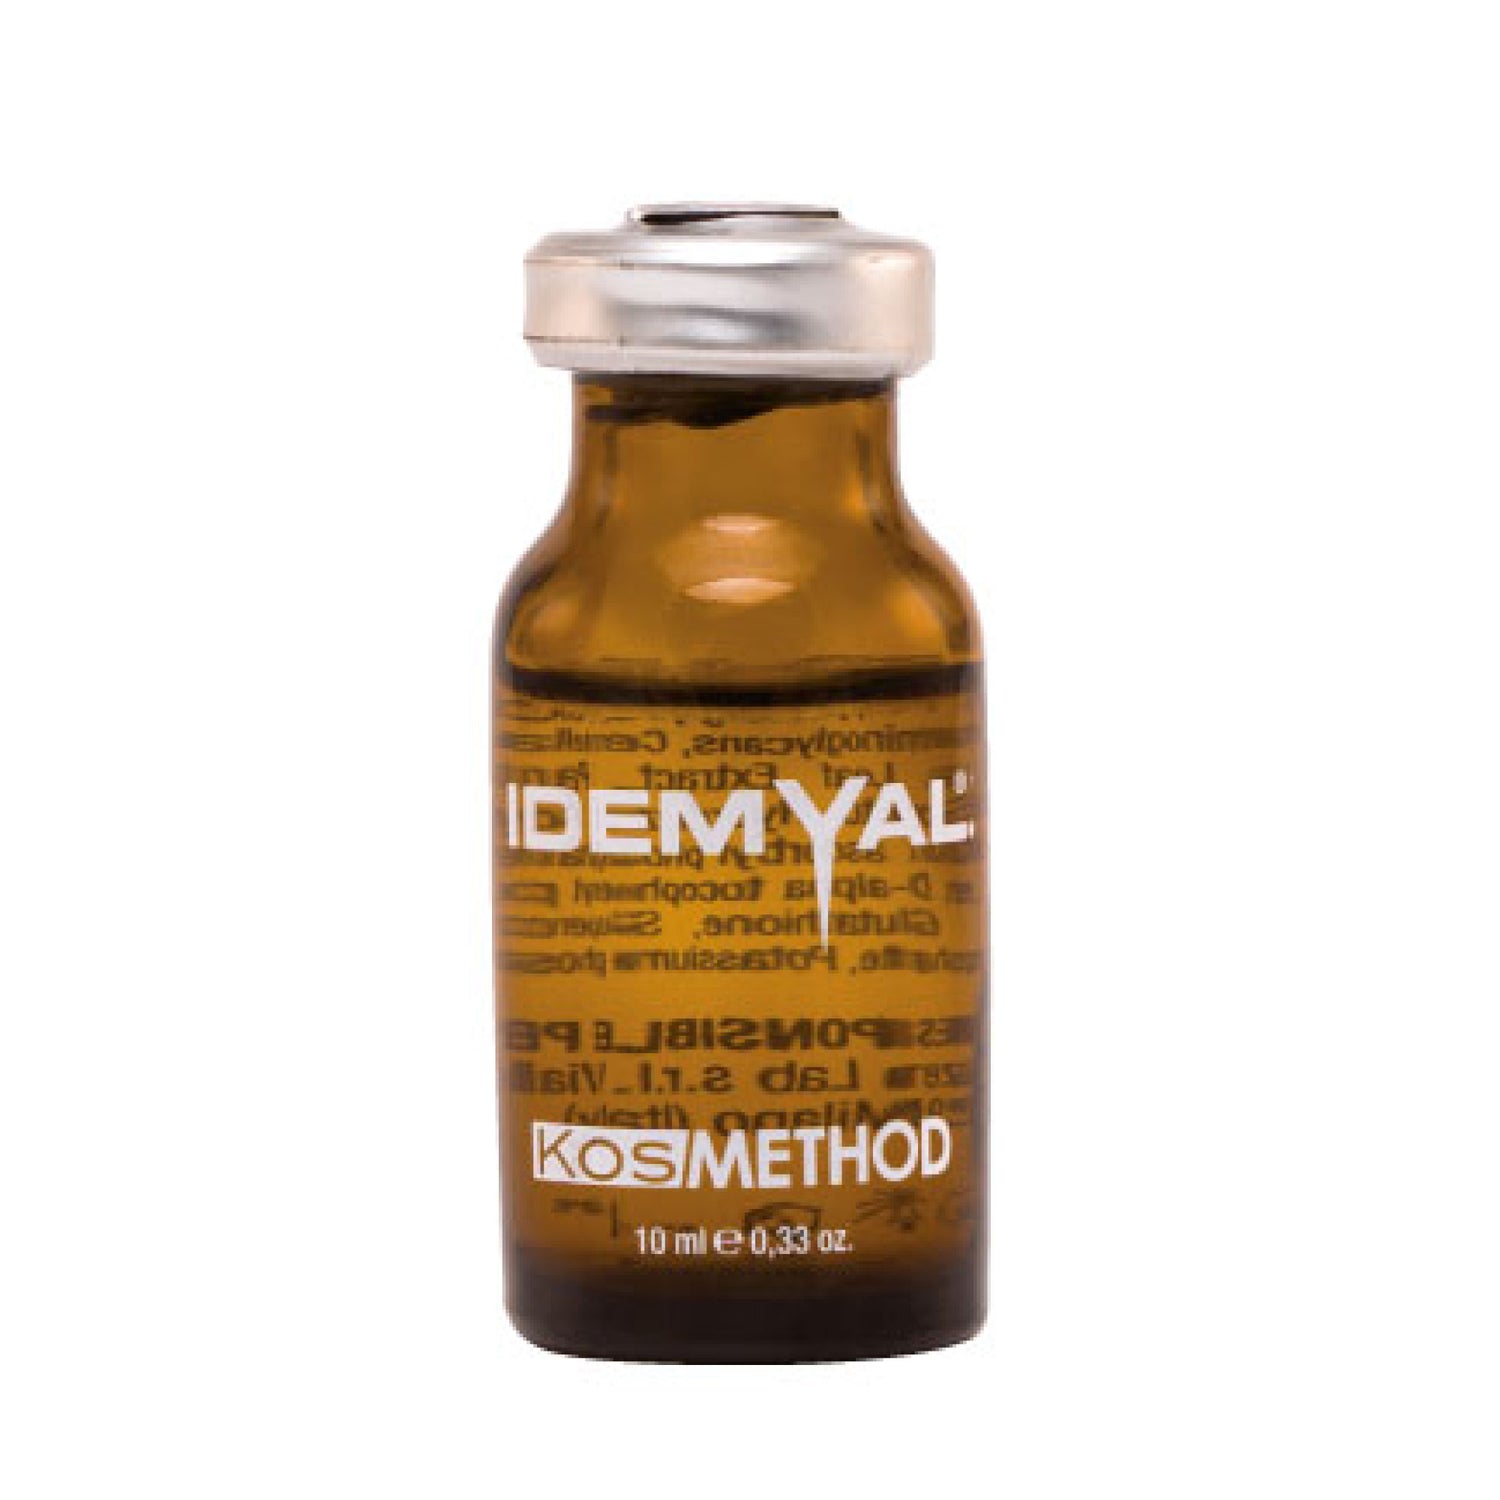 IDEMYAL - Anti-Age Lifting Treatment for Skin Regeneration and Appearance